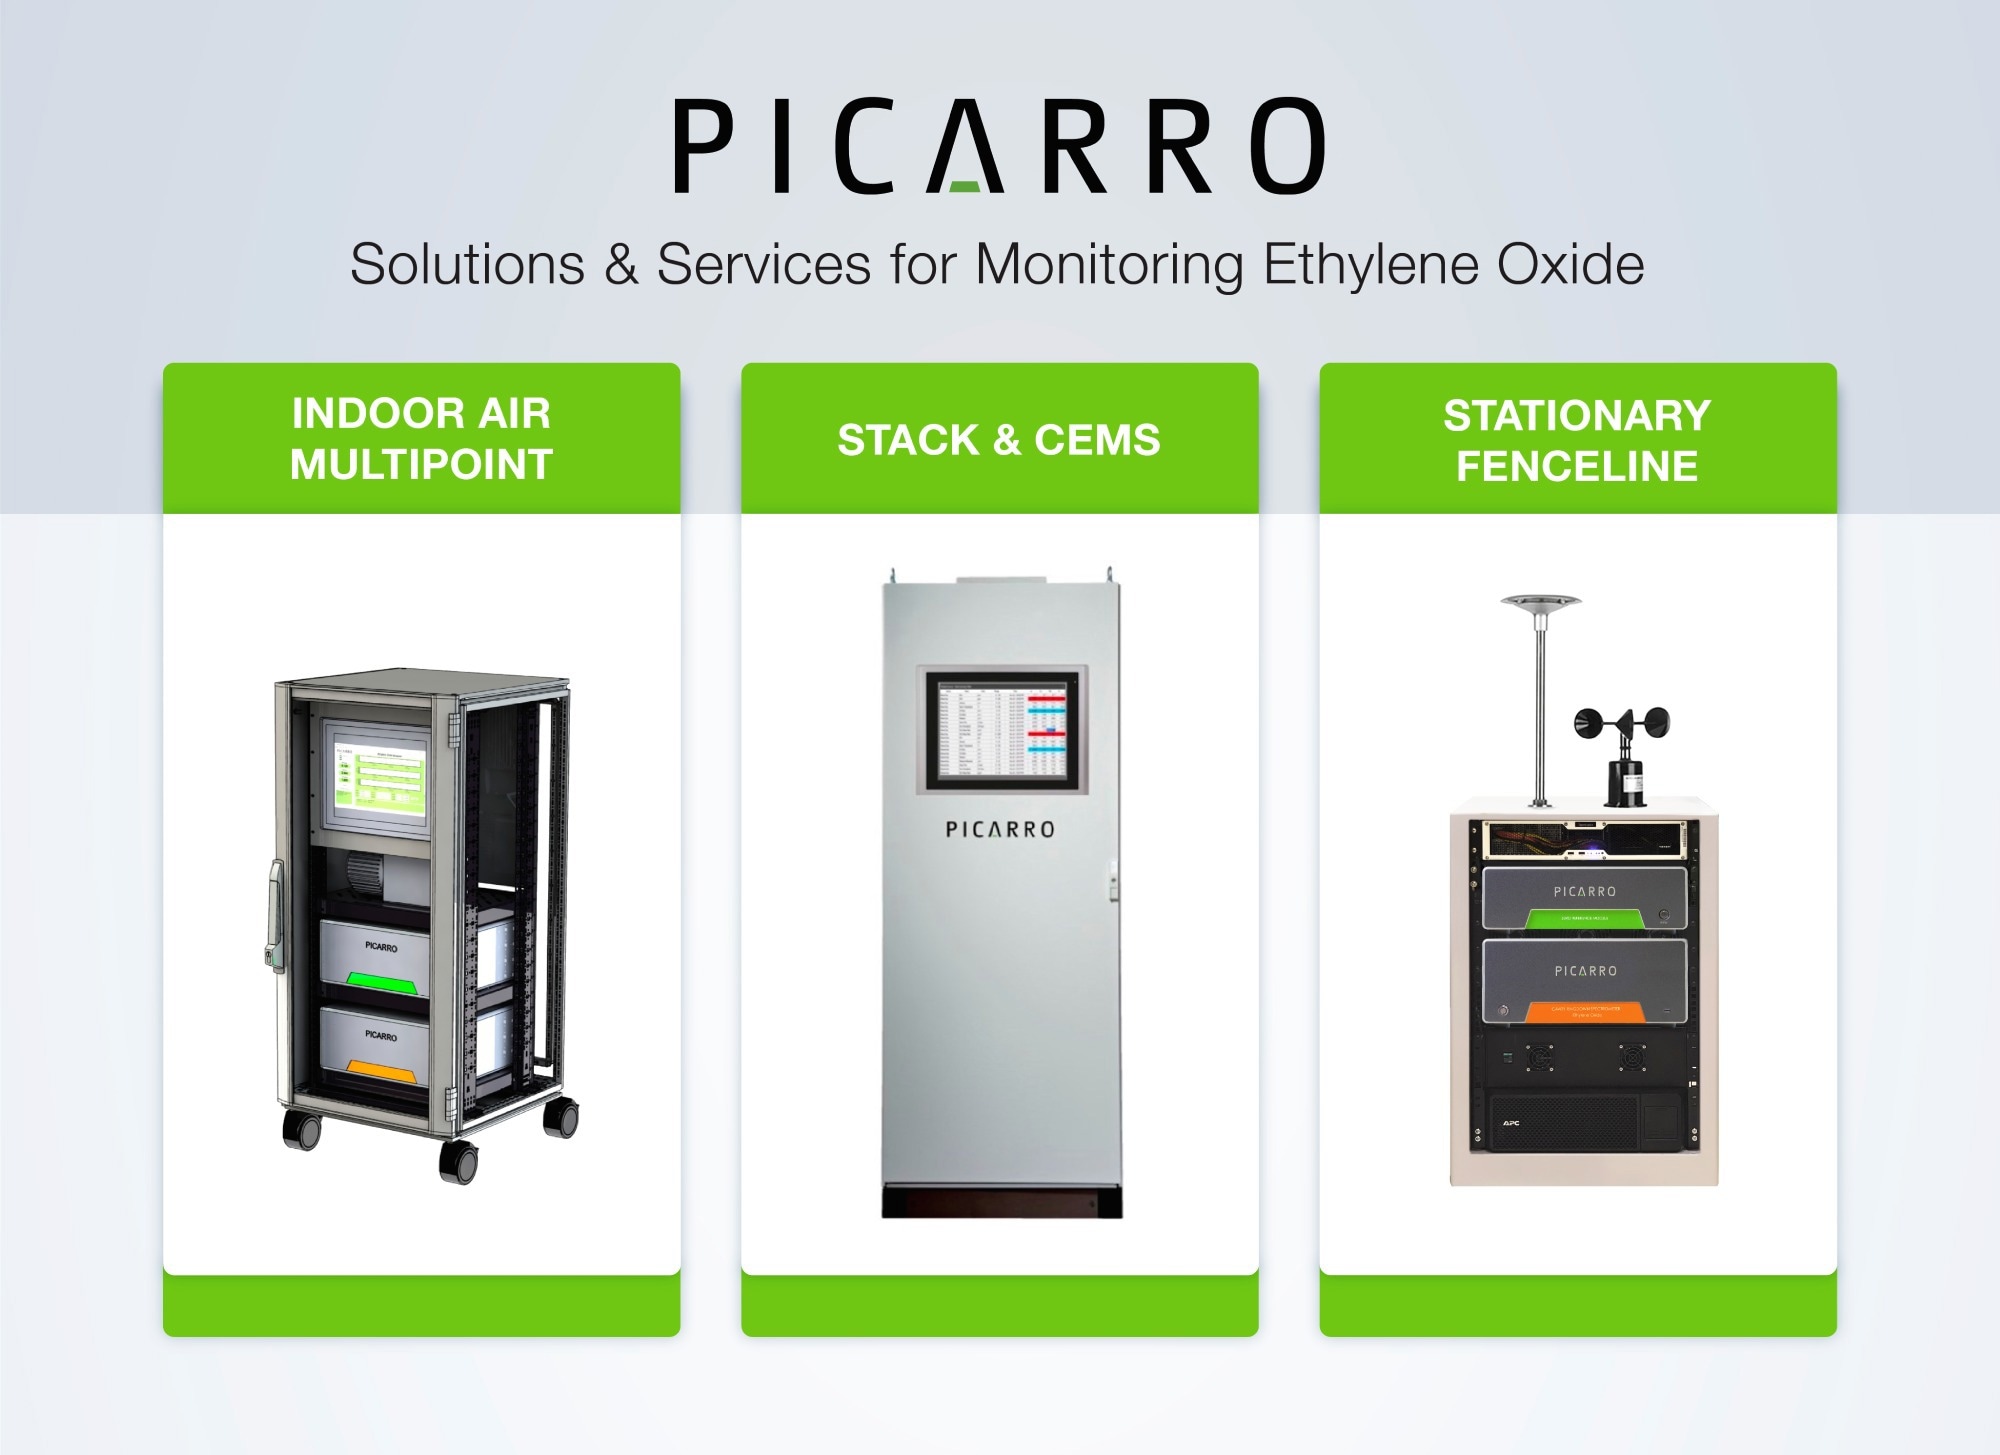 Picarro’s suite of CRDS-based, EtO monitoring systems provides end-to-end visibility for stacks, indoor air, and fencelines and is supported by a team of highly qualified professionals